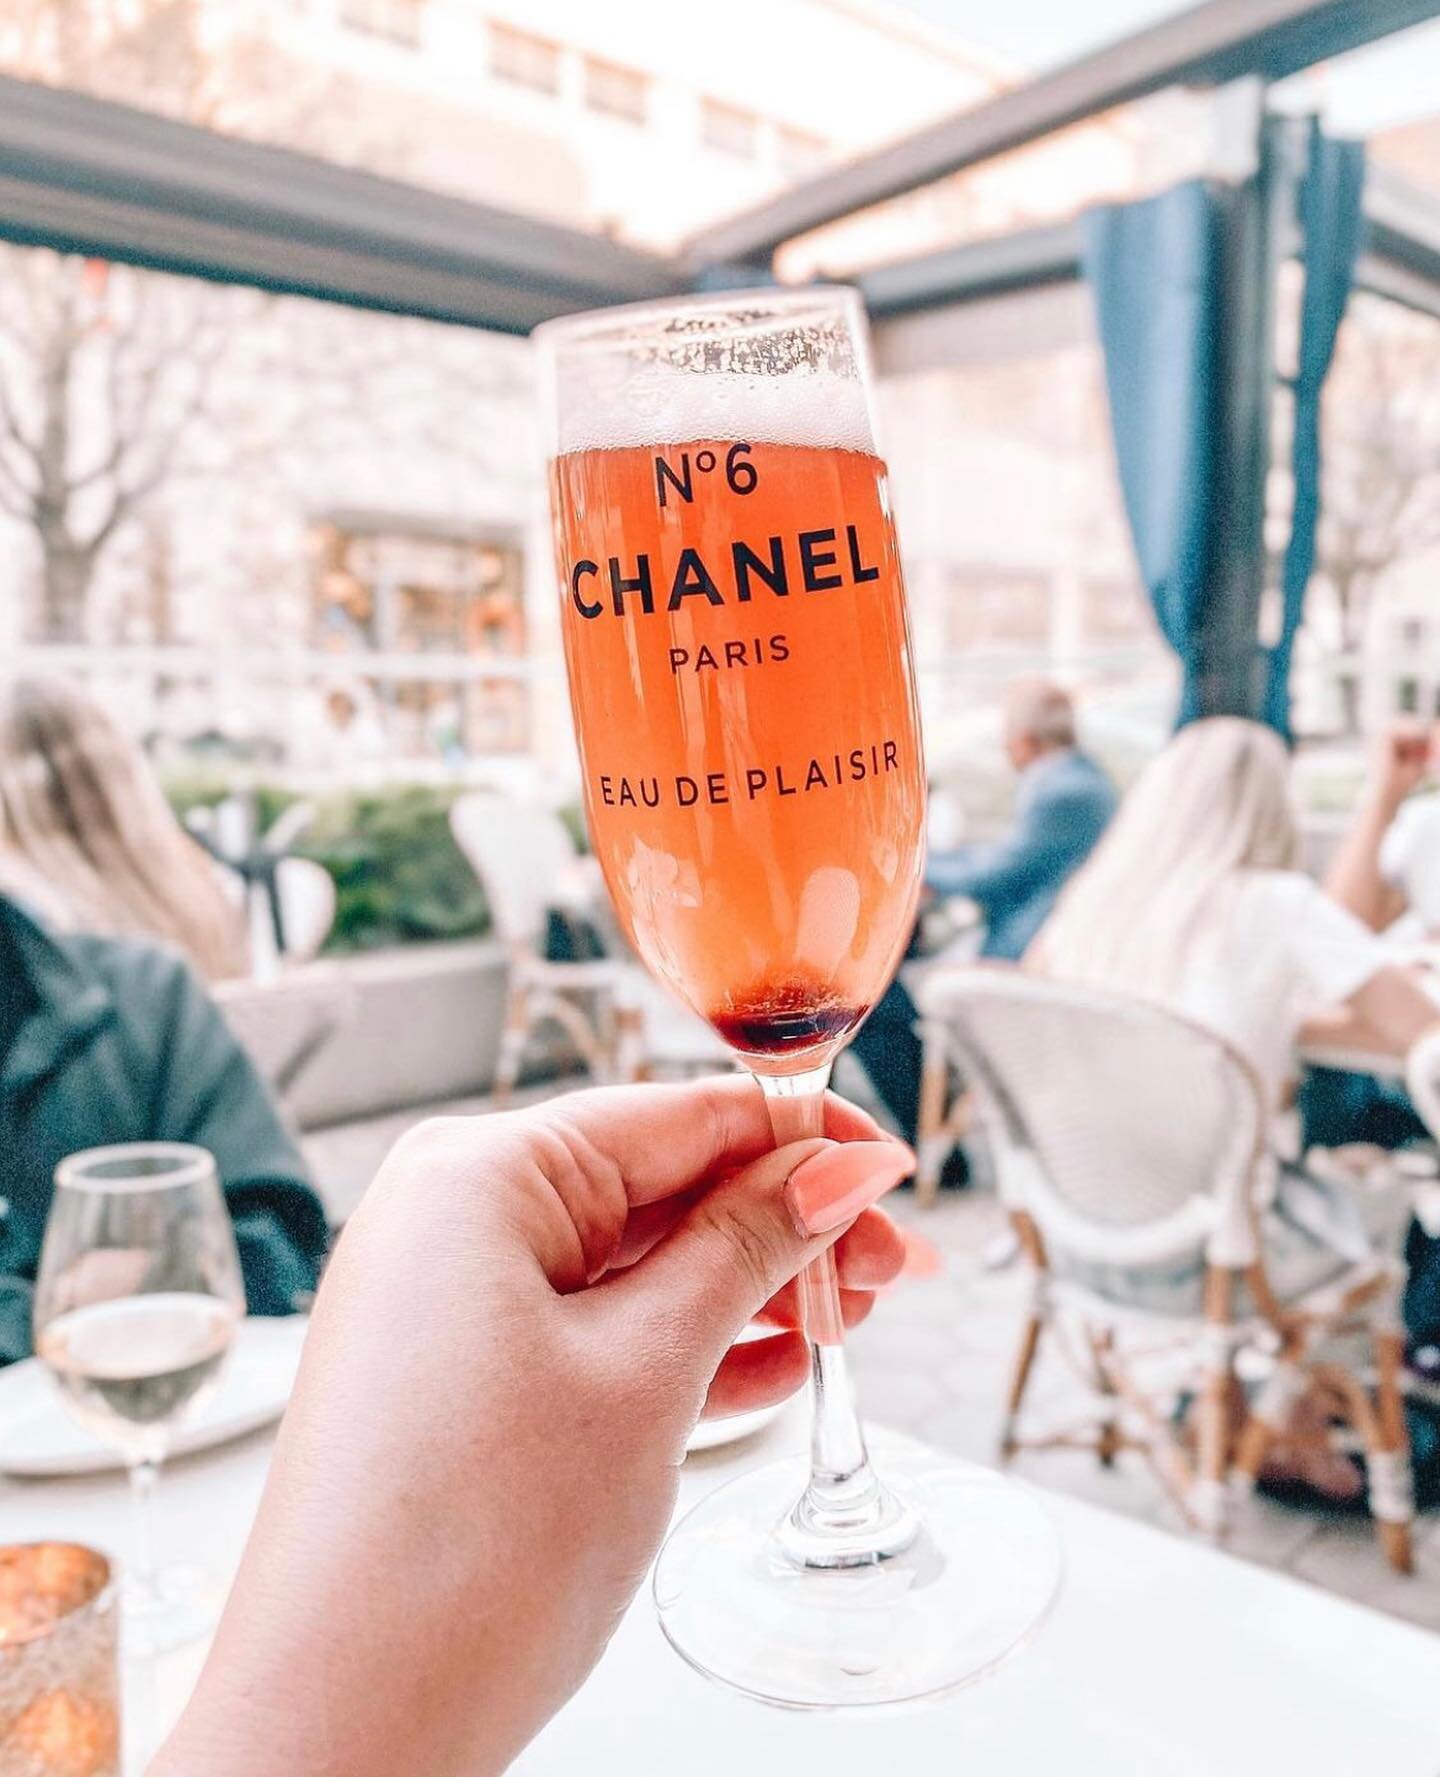 Raise a glass 🥂cheers to the weekend! #legacywest